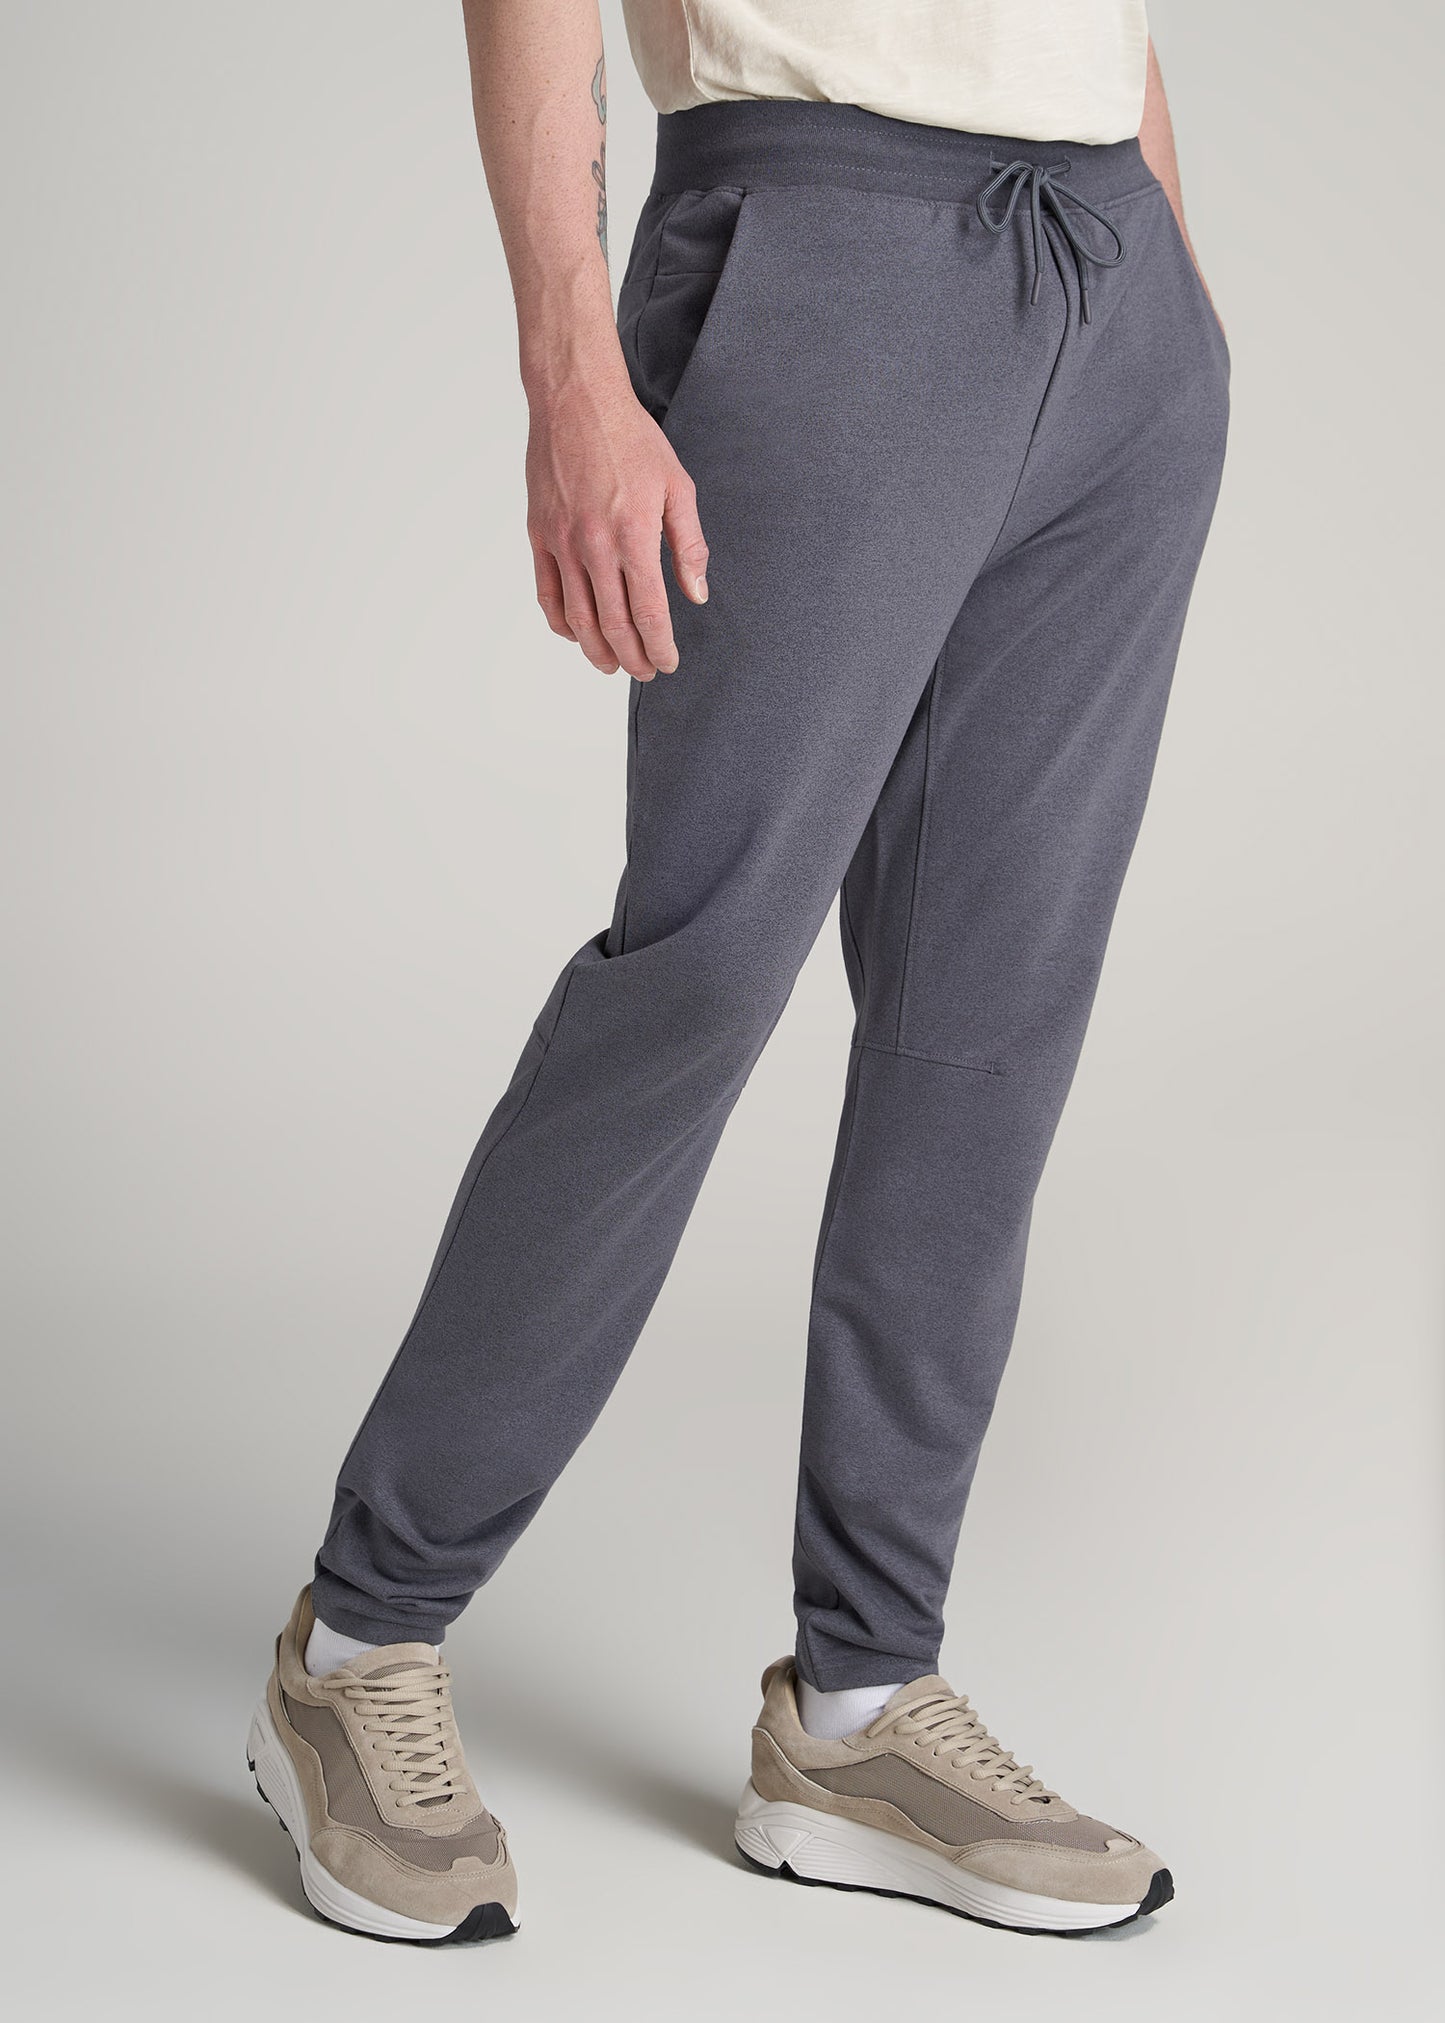       American-Tall-Men-Performance-Tapered-French-Terry-Sweatpants-Charcoal-Mix-side